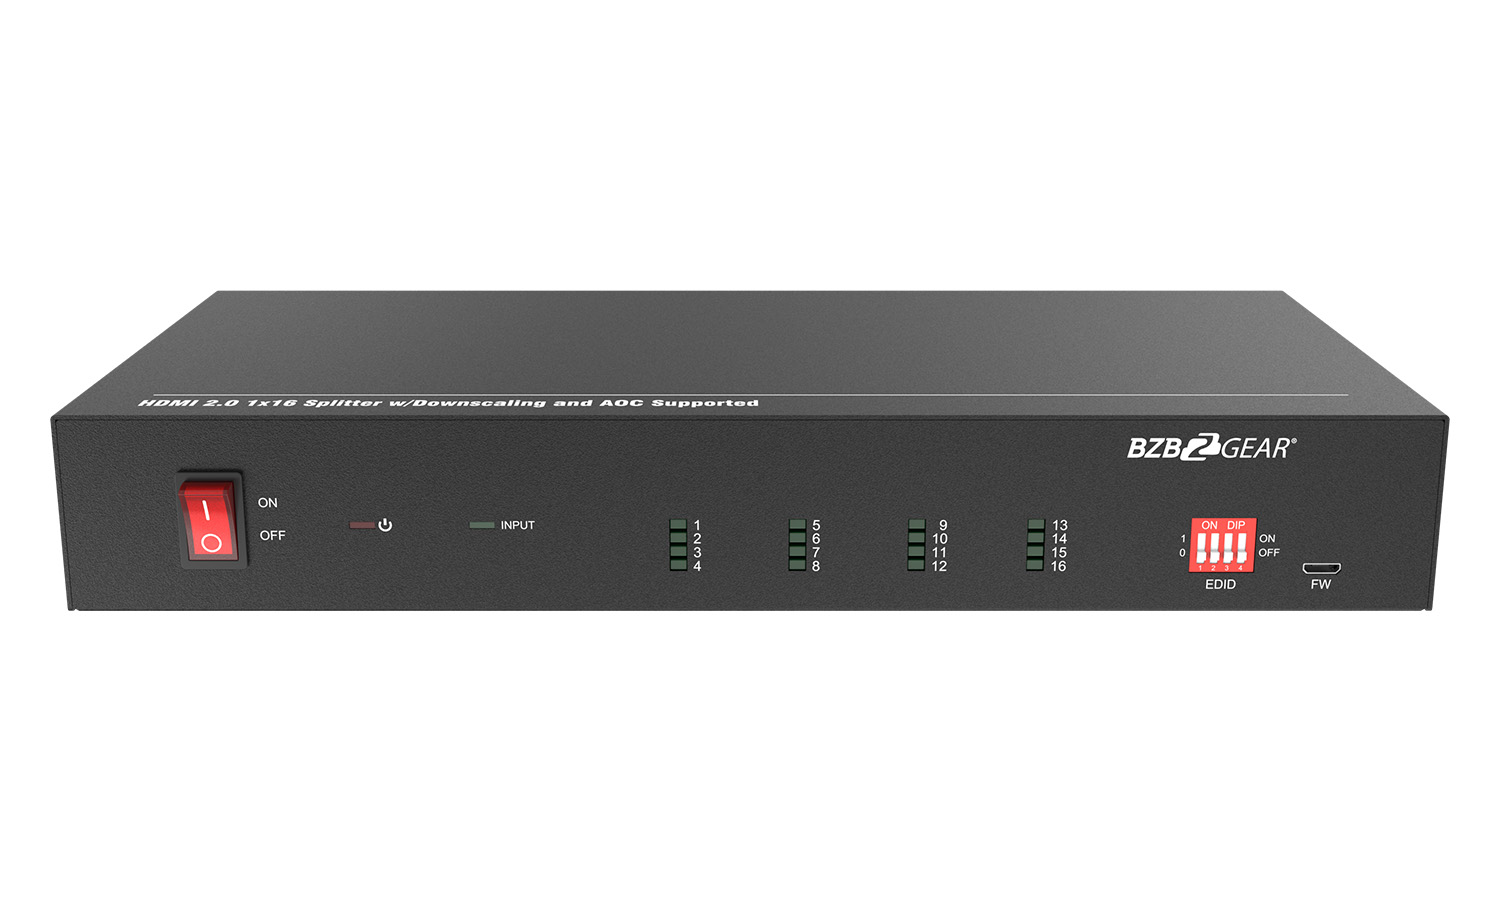 BG-UHD-DA1X16 1X16 4K HDMI Splitter with Downscaling and AOC Supported by BZBGEAR